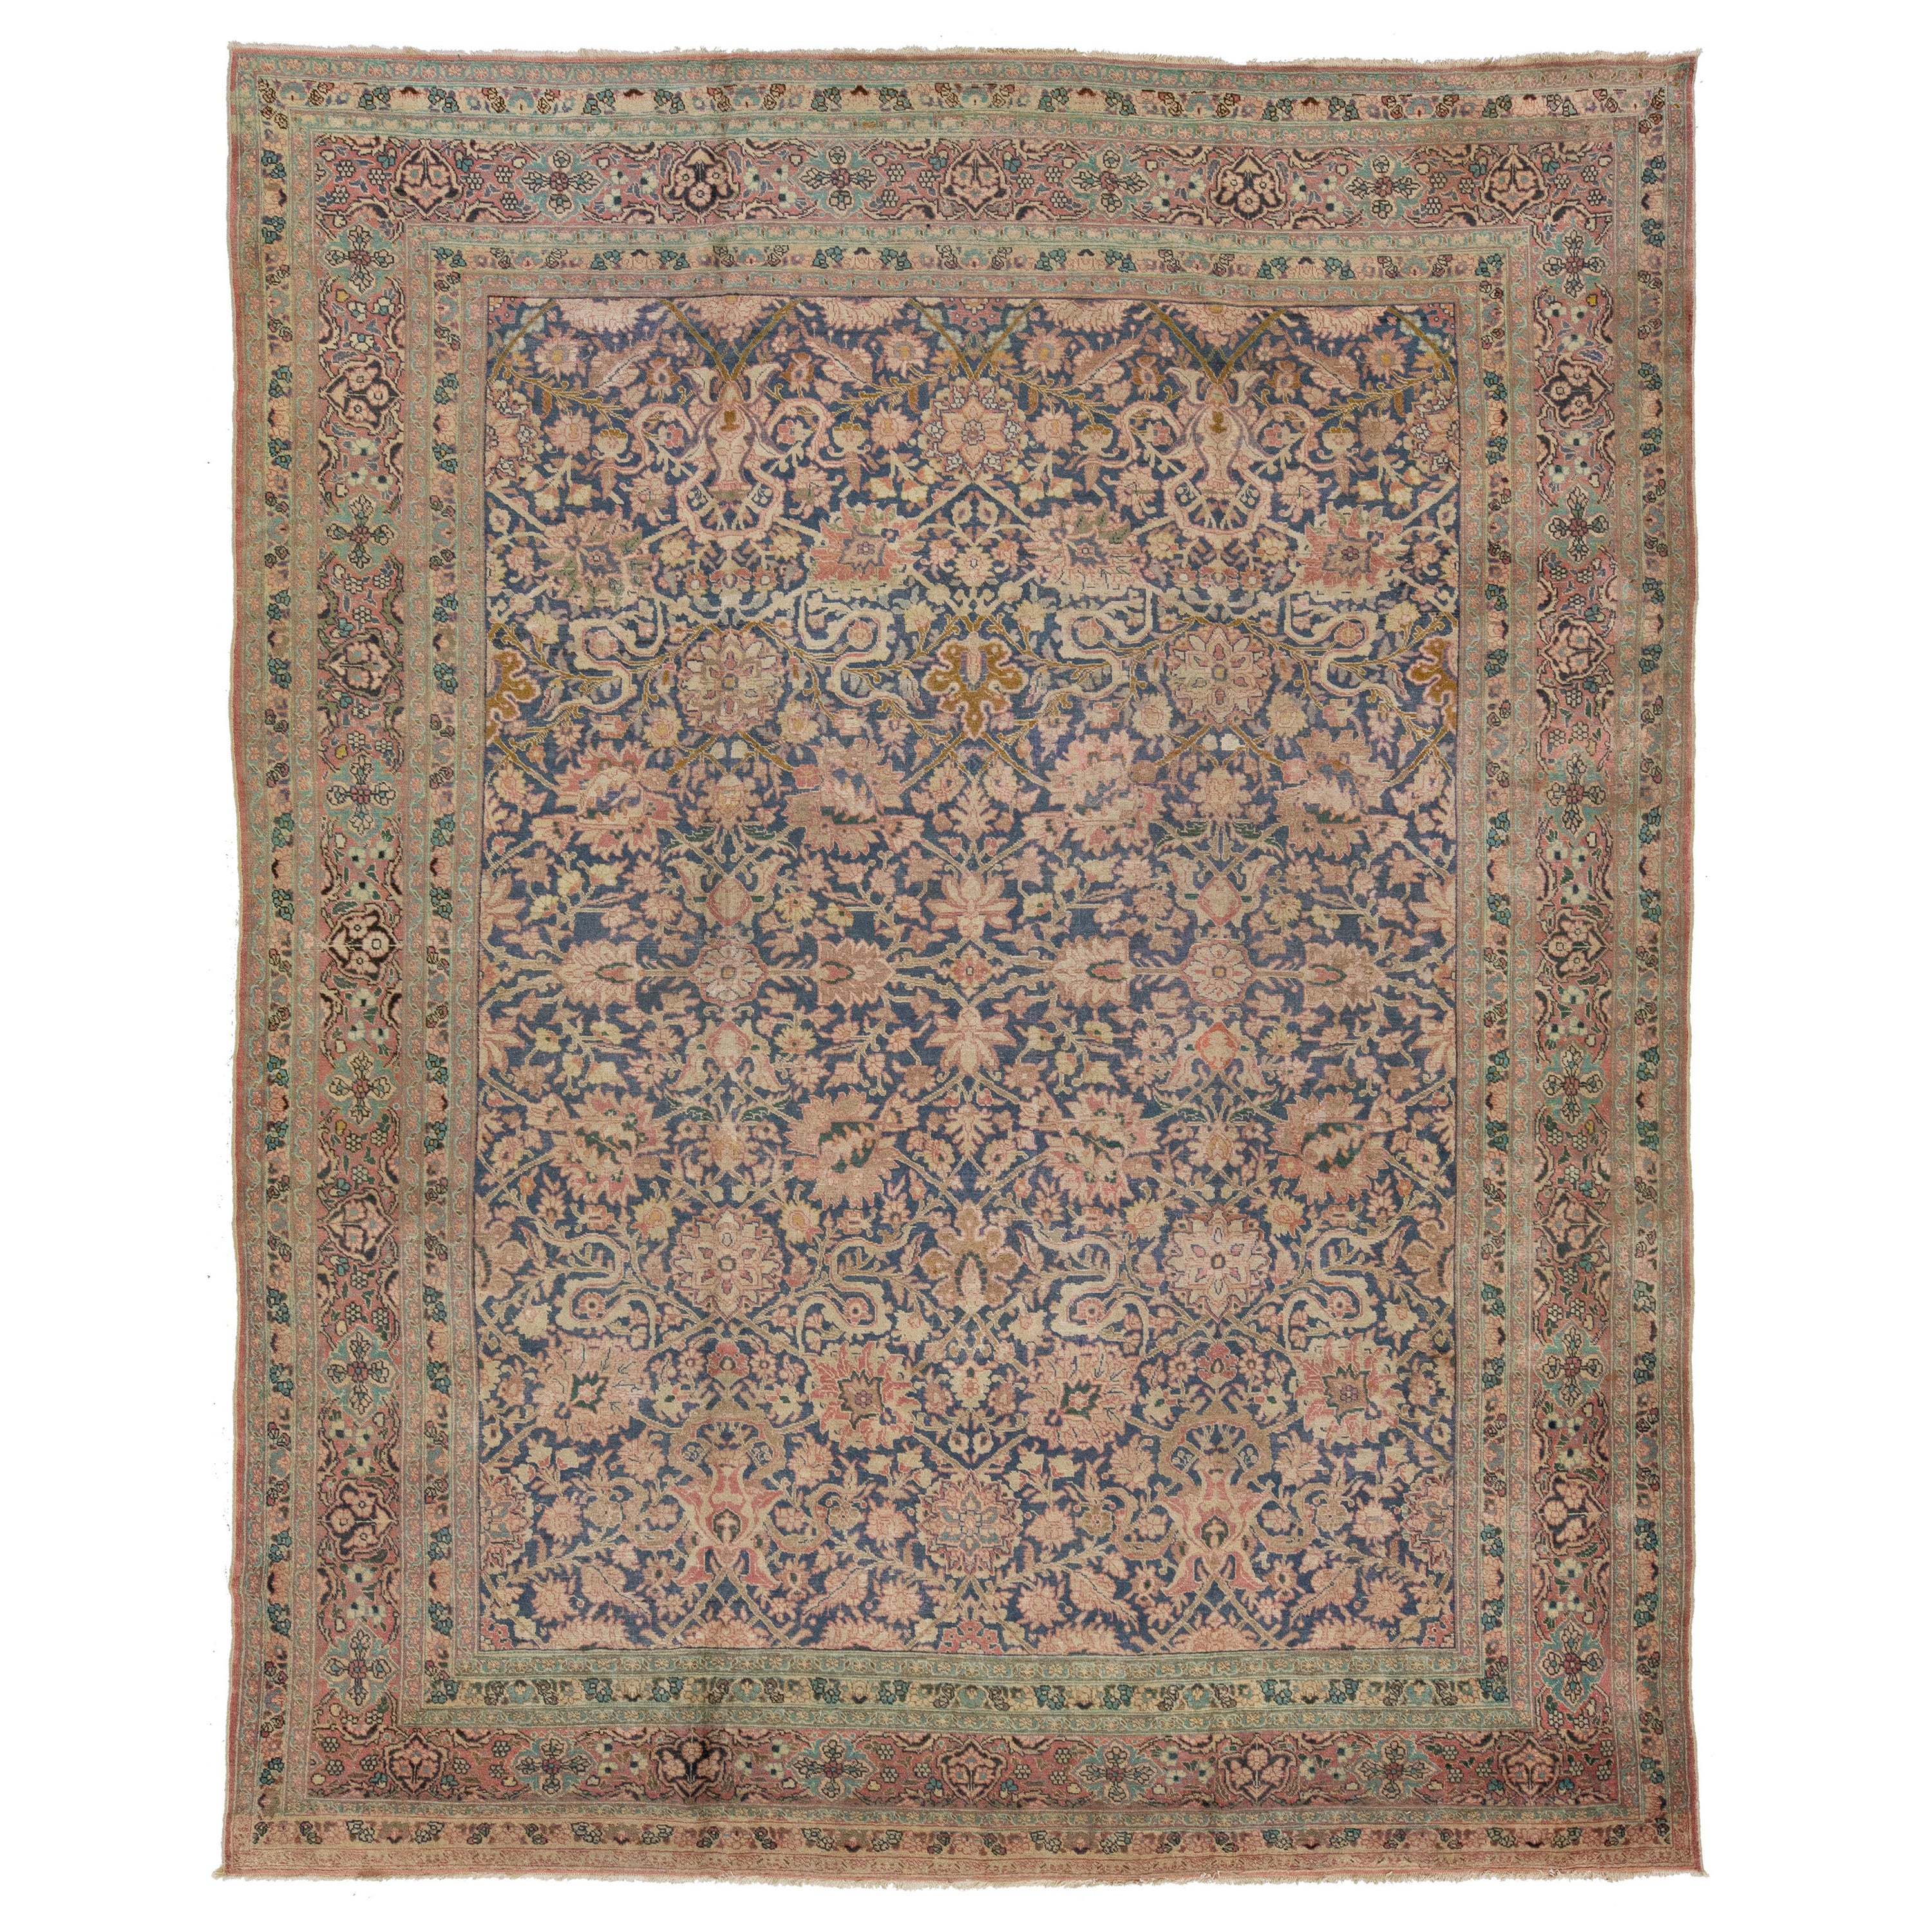 1920s Antique Persian Tabriz Blue Wool Rug With Allover Floral Pattern For Sale